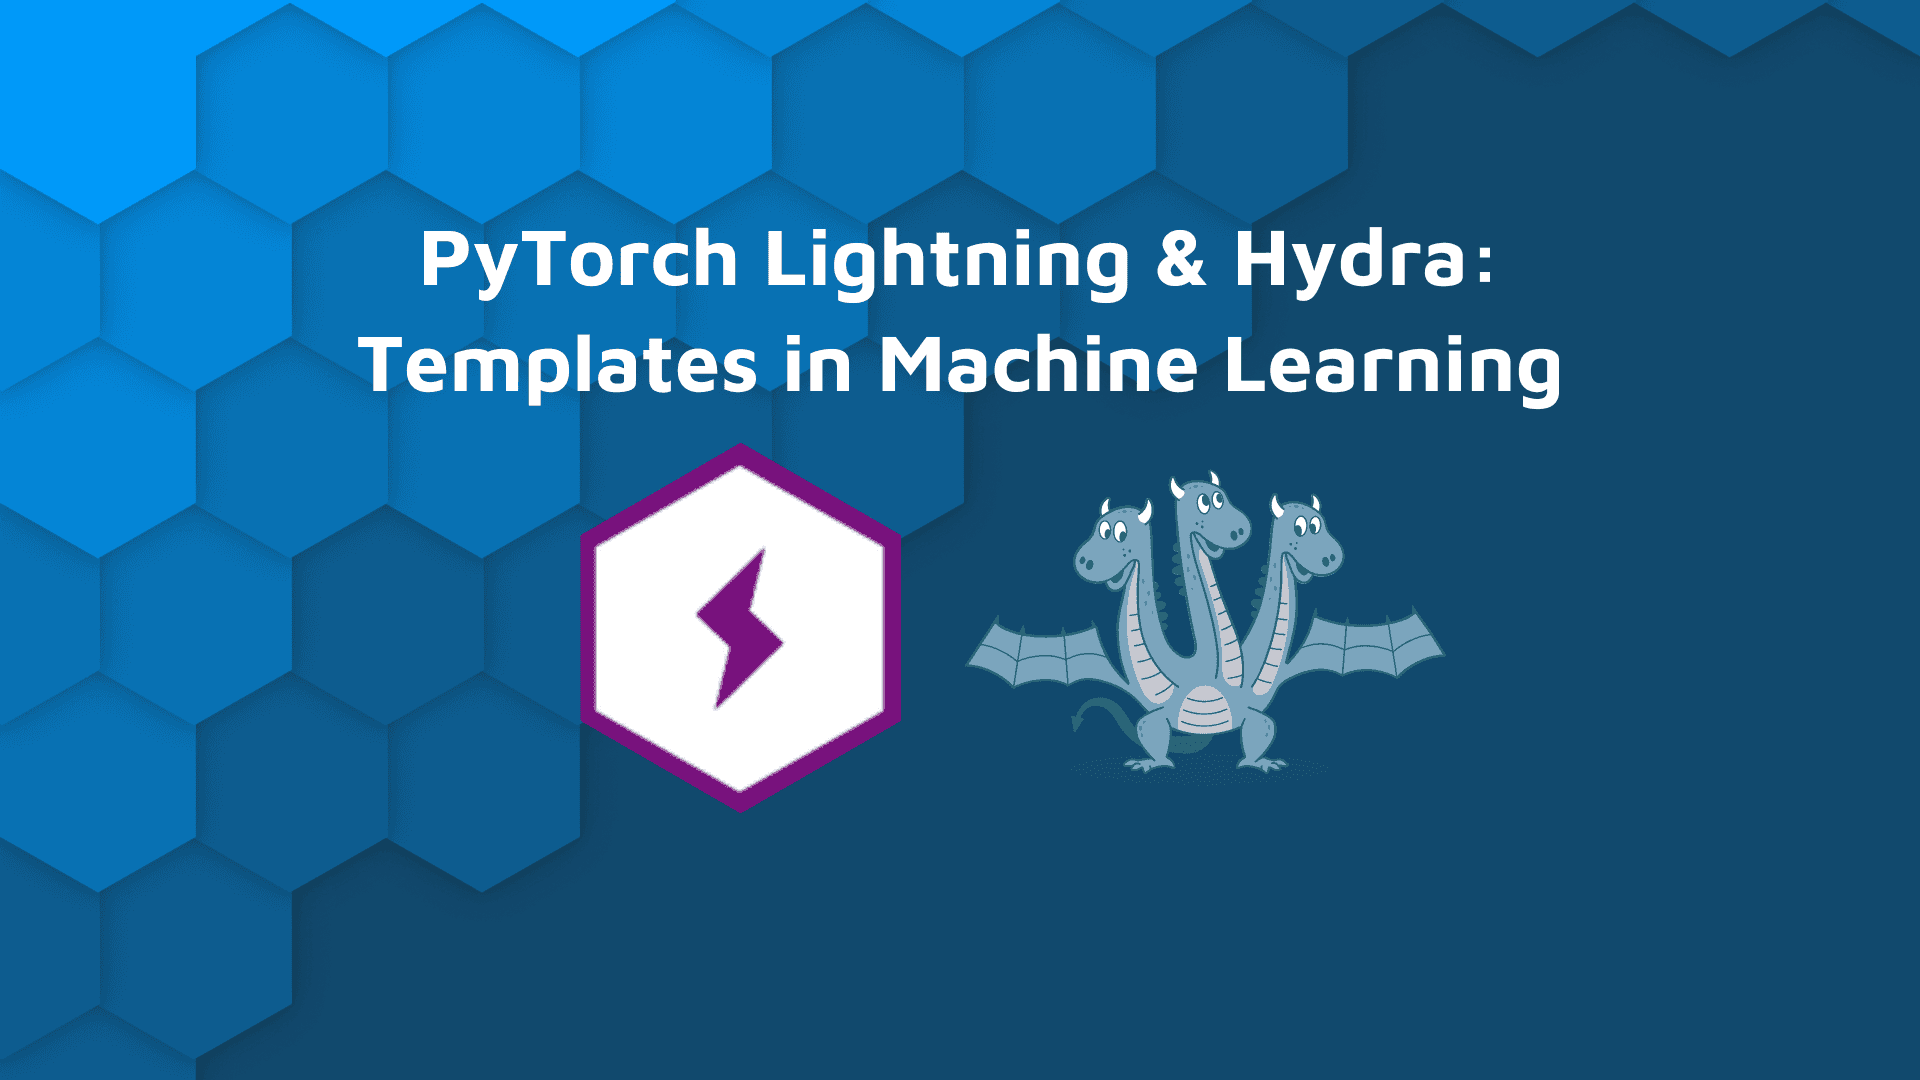 Blog banner with white text "PyTorch Lightning & Hydra: Templates in Machine Learning", PyTorch lightning logo, and Hydra logo.